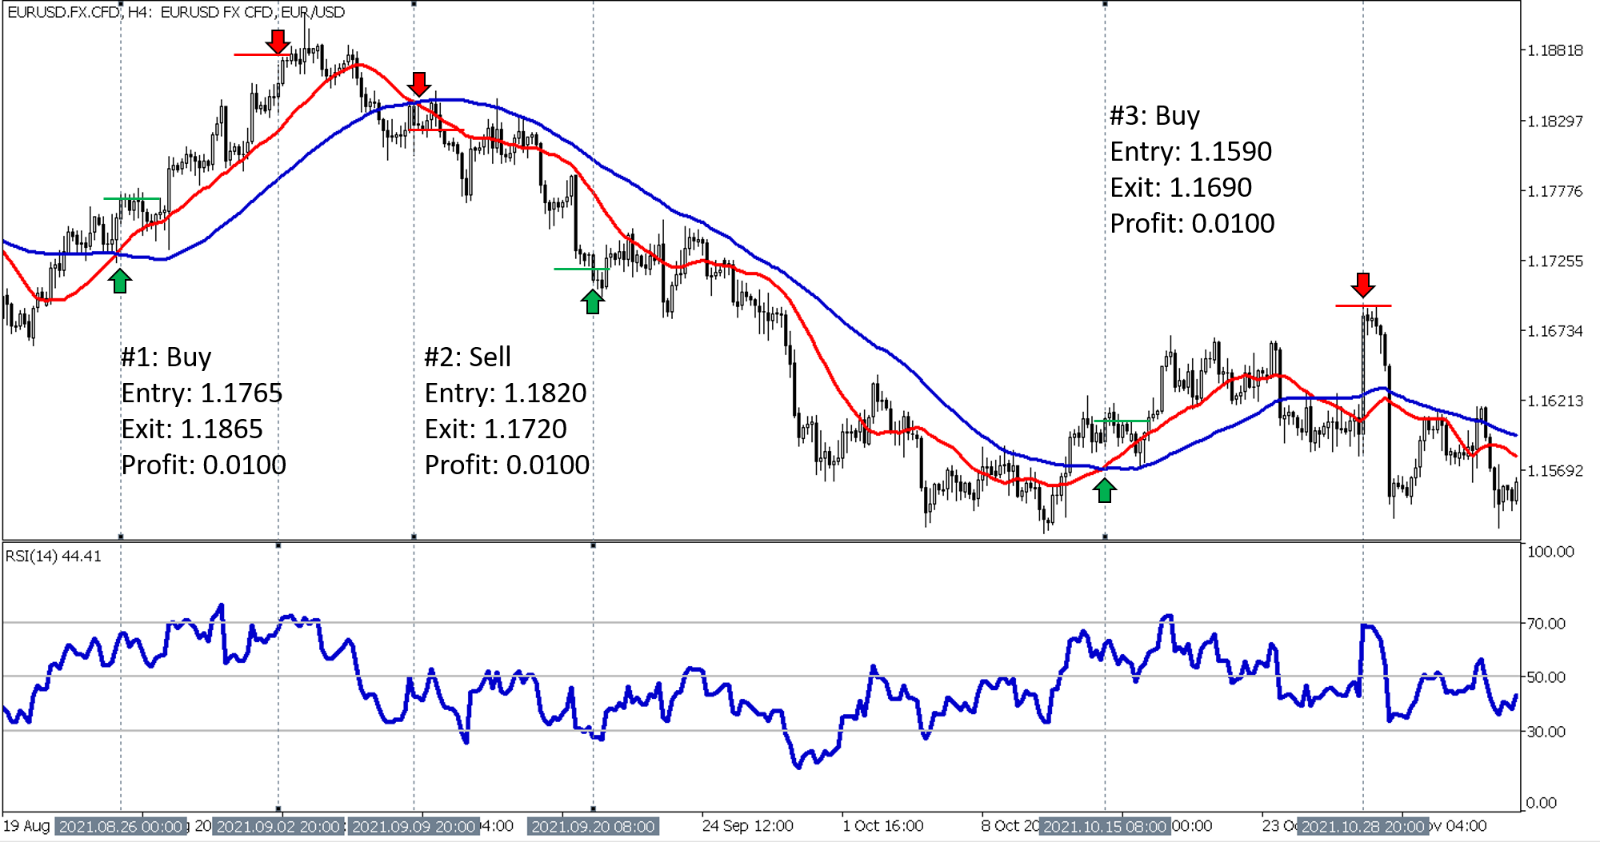 Trading FX is Simple! – with a trading plan